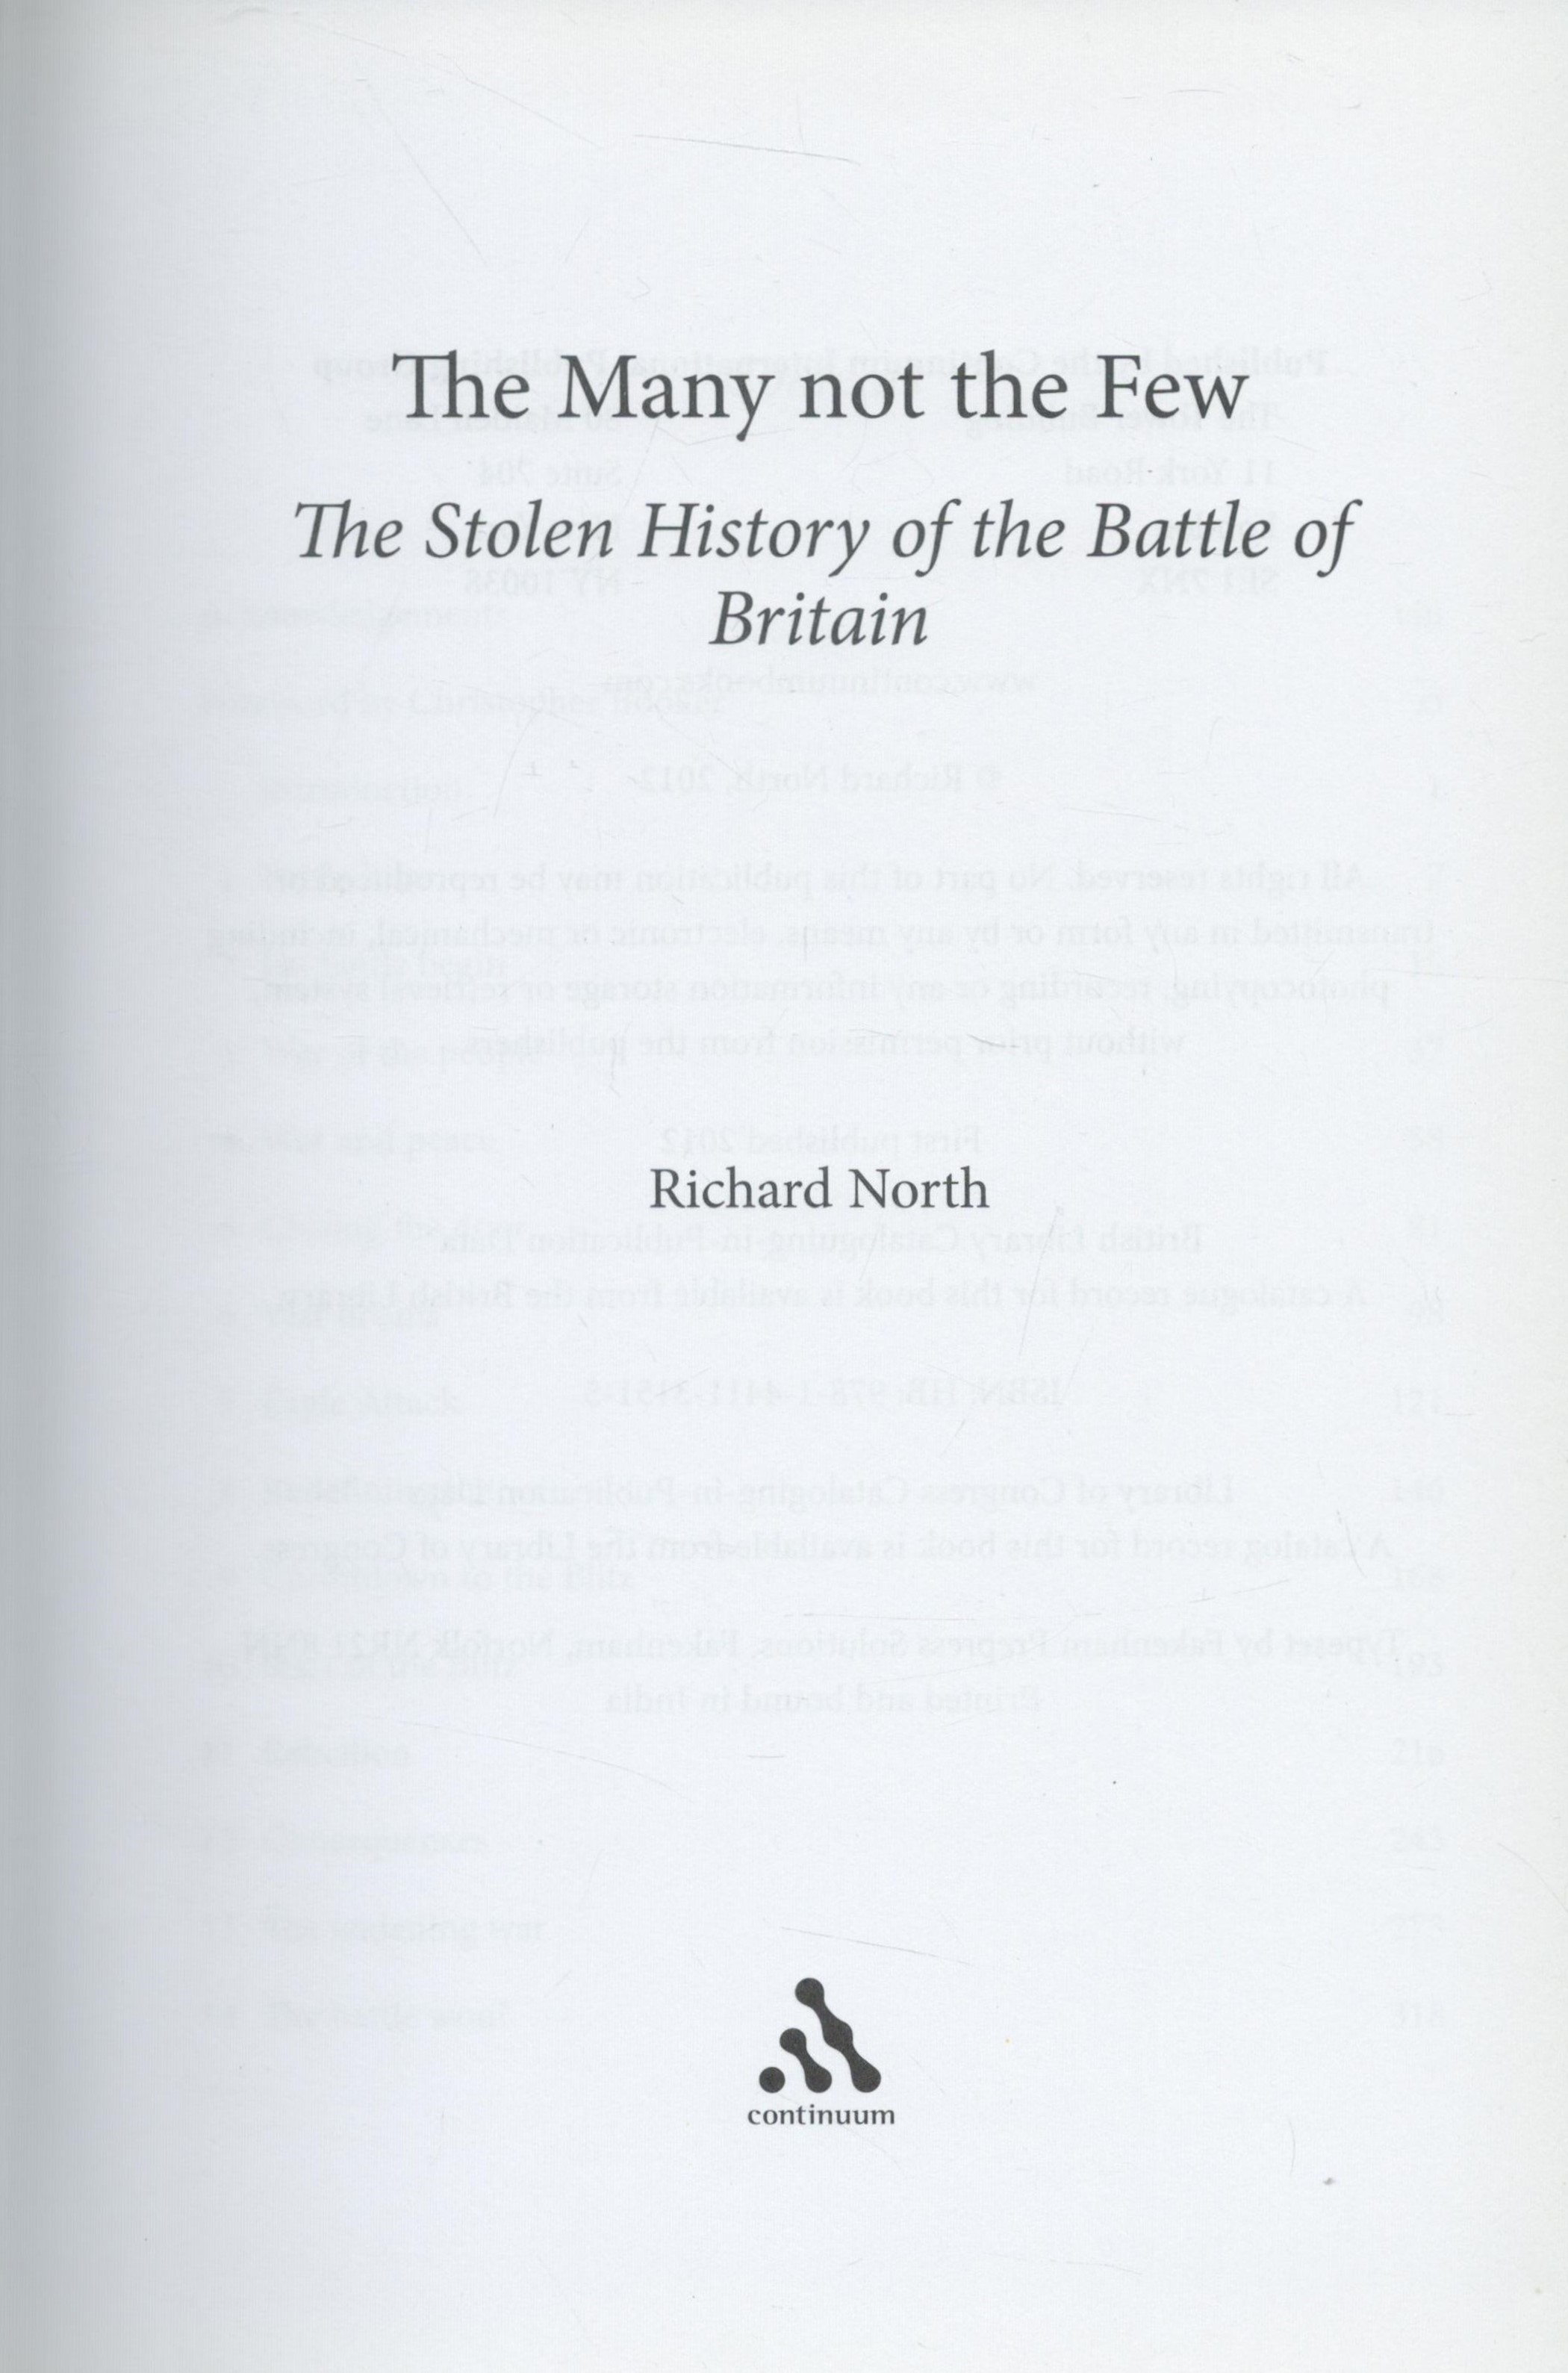 The Many Not the Few - The Stolen History of the Battle of Britain by Richard North 2012 Hardback - Image 5 of 9